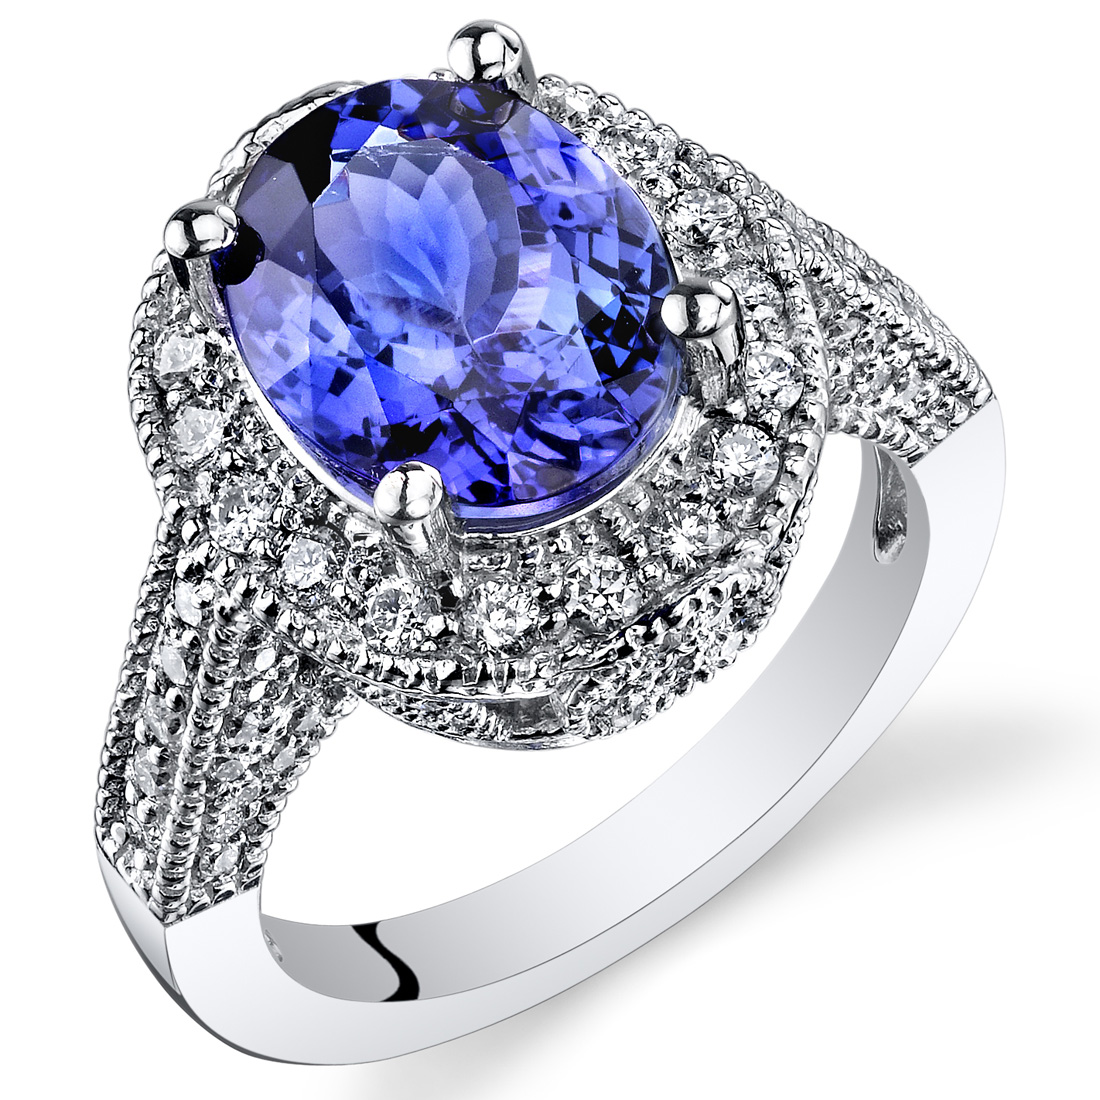 4.91 Carats Oval Shape Tanzanite Diamond Ring in 14Kt White Gold Size 7 ...